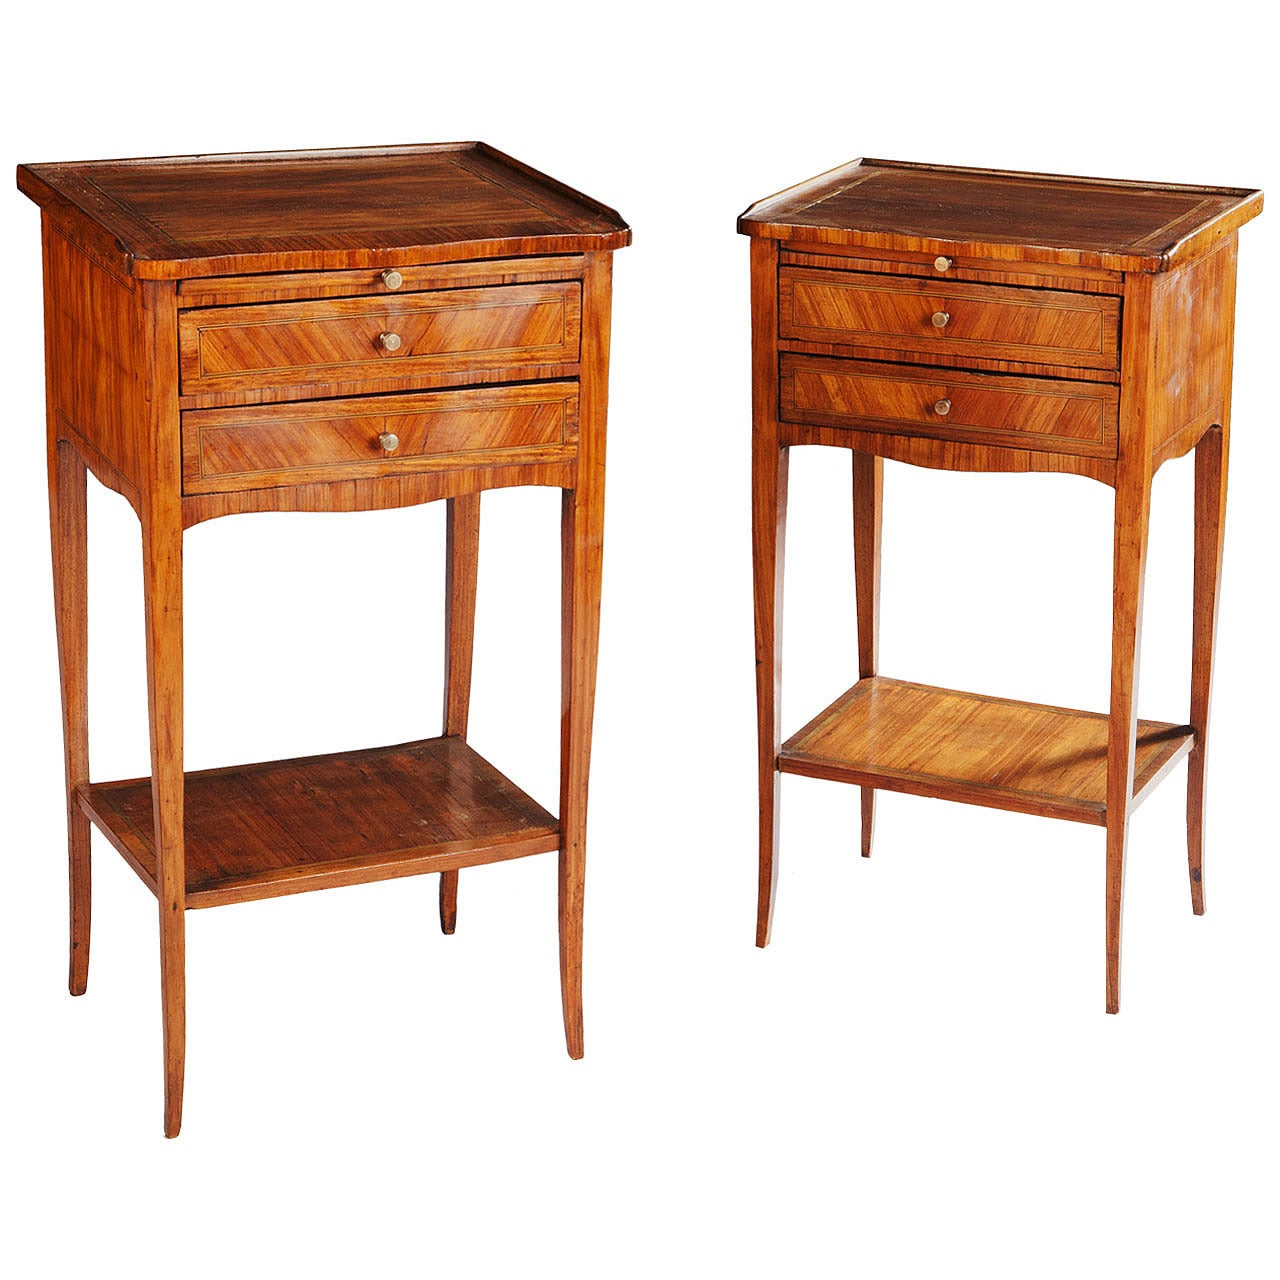 Fine Pair of Tulip Wood Bedside Tables